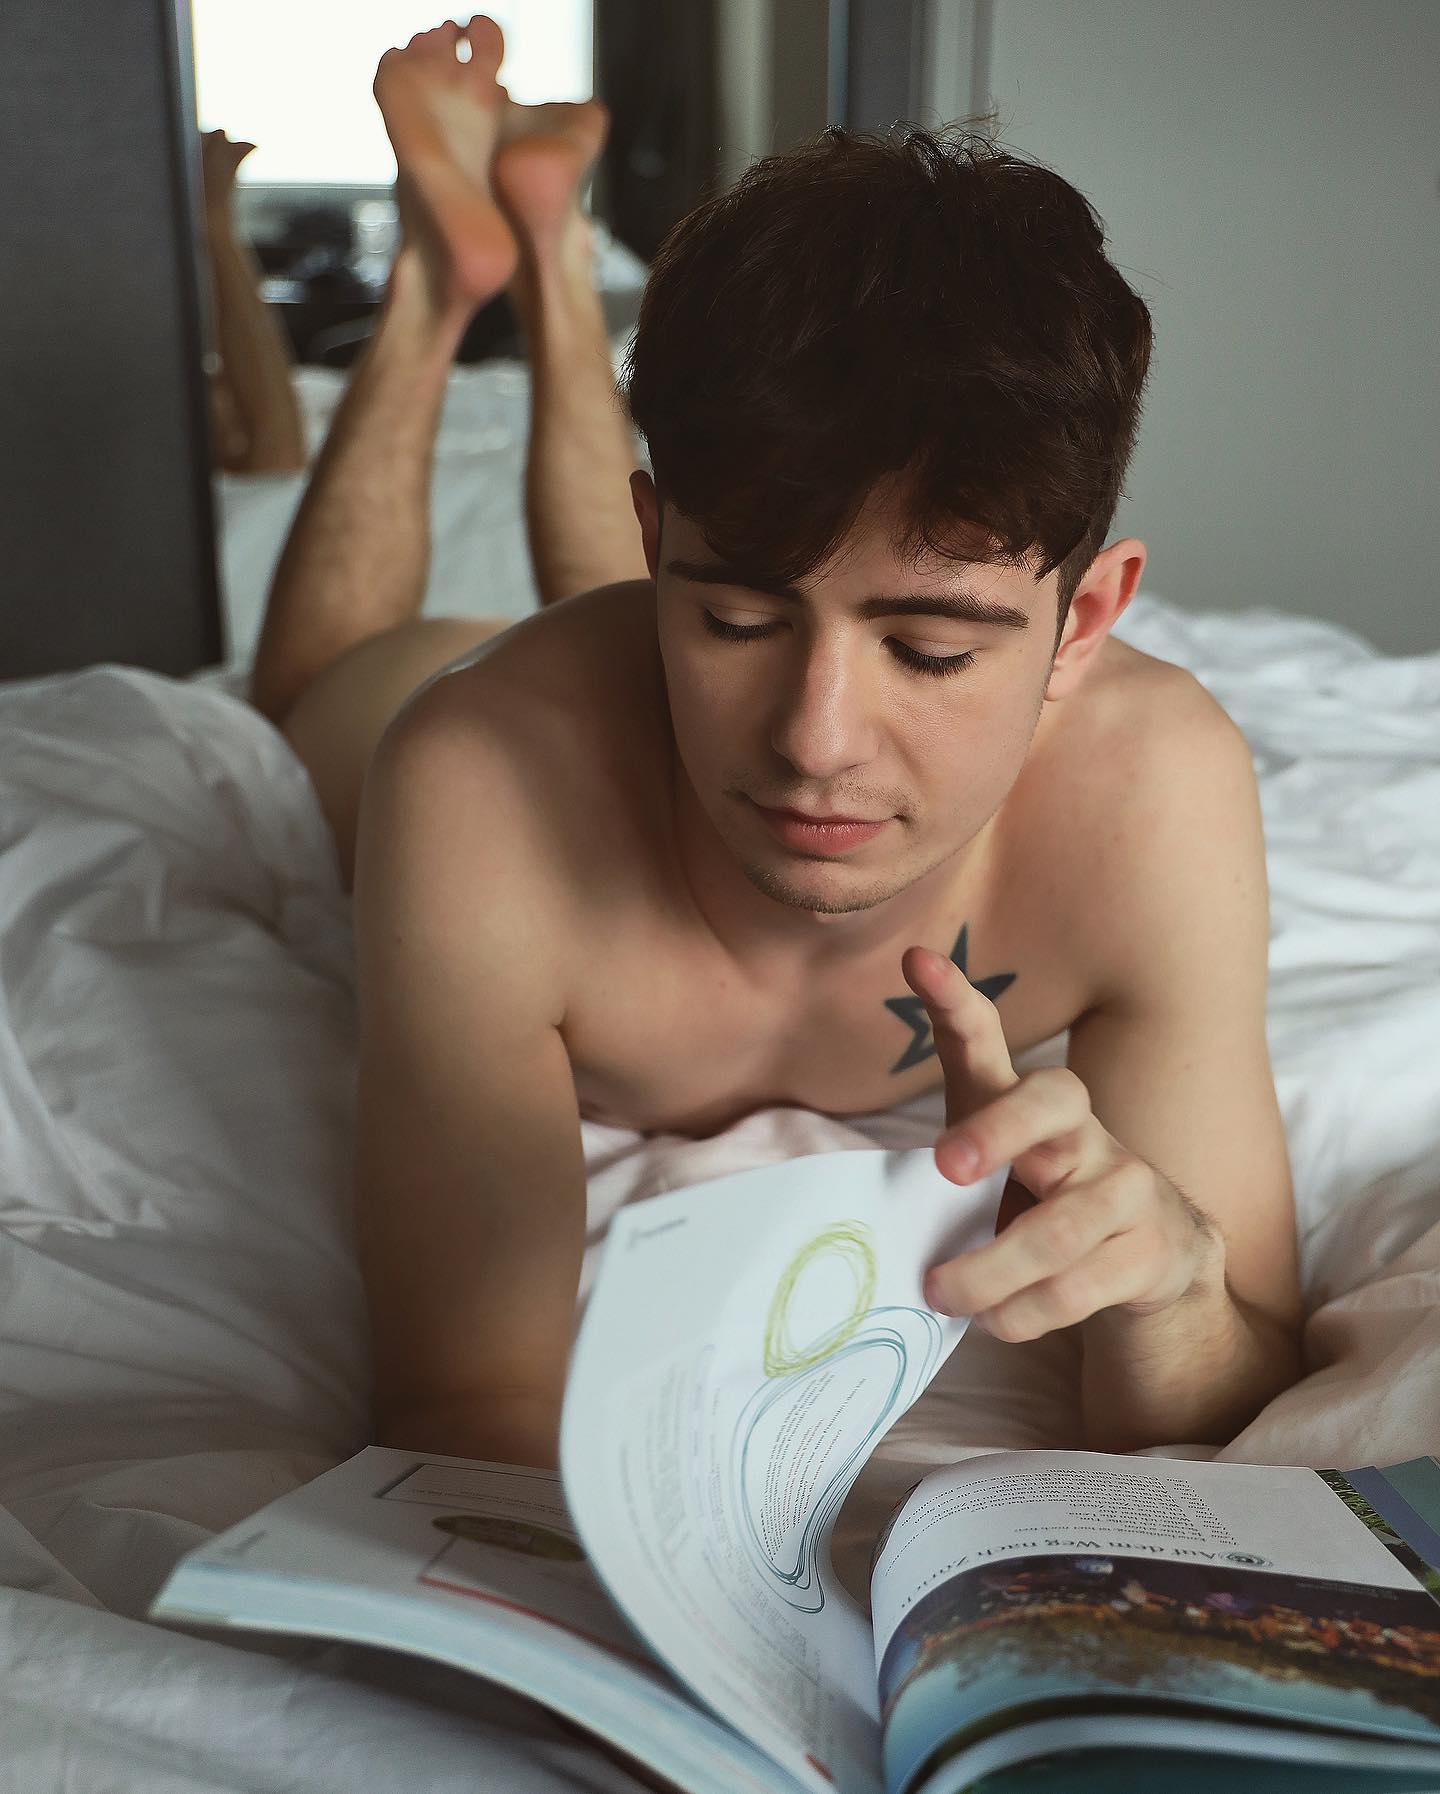 Do you also read books when you are naked? 😈 I am reading about the hot collabs I did in London that is available to enjoy on my Fans pages 😏 L!nk my !n b!0 @imryanolsenvip 🔞
.
.
.
.
#gay #gaytwink #gayhot #gaysexy #gaycute #gayboy #gaymodel #gayfit #instagay #gaysnap #gayfollow #gayhunk #instaboy #grindr #gayjock #gayselfie #gayguy #gayabs #gayman